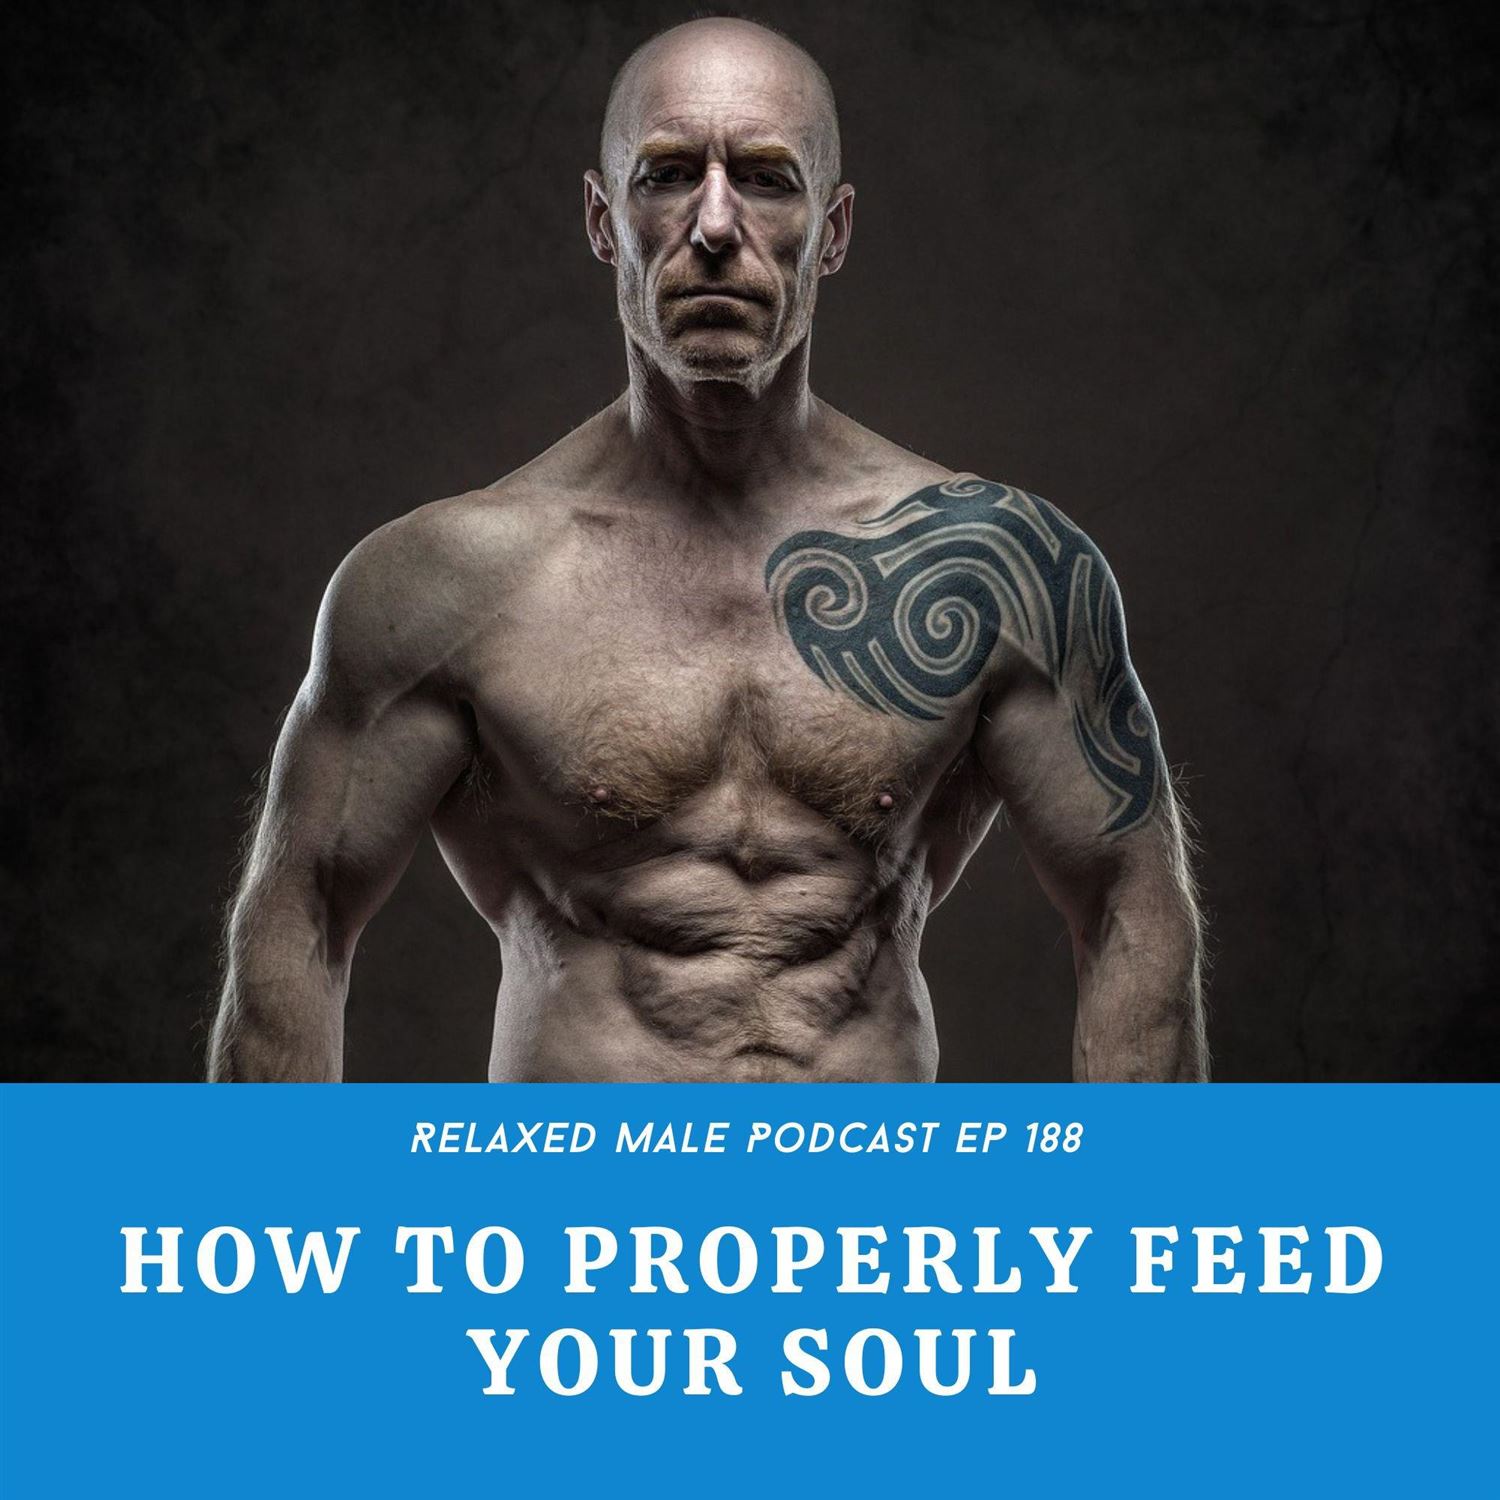 How To Properly Feed Your Soul